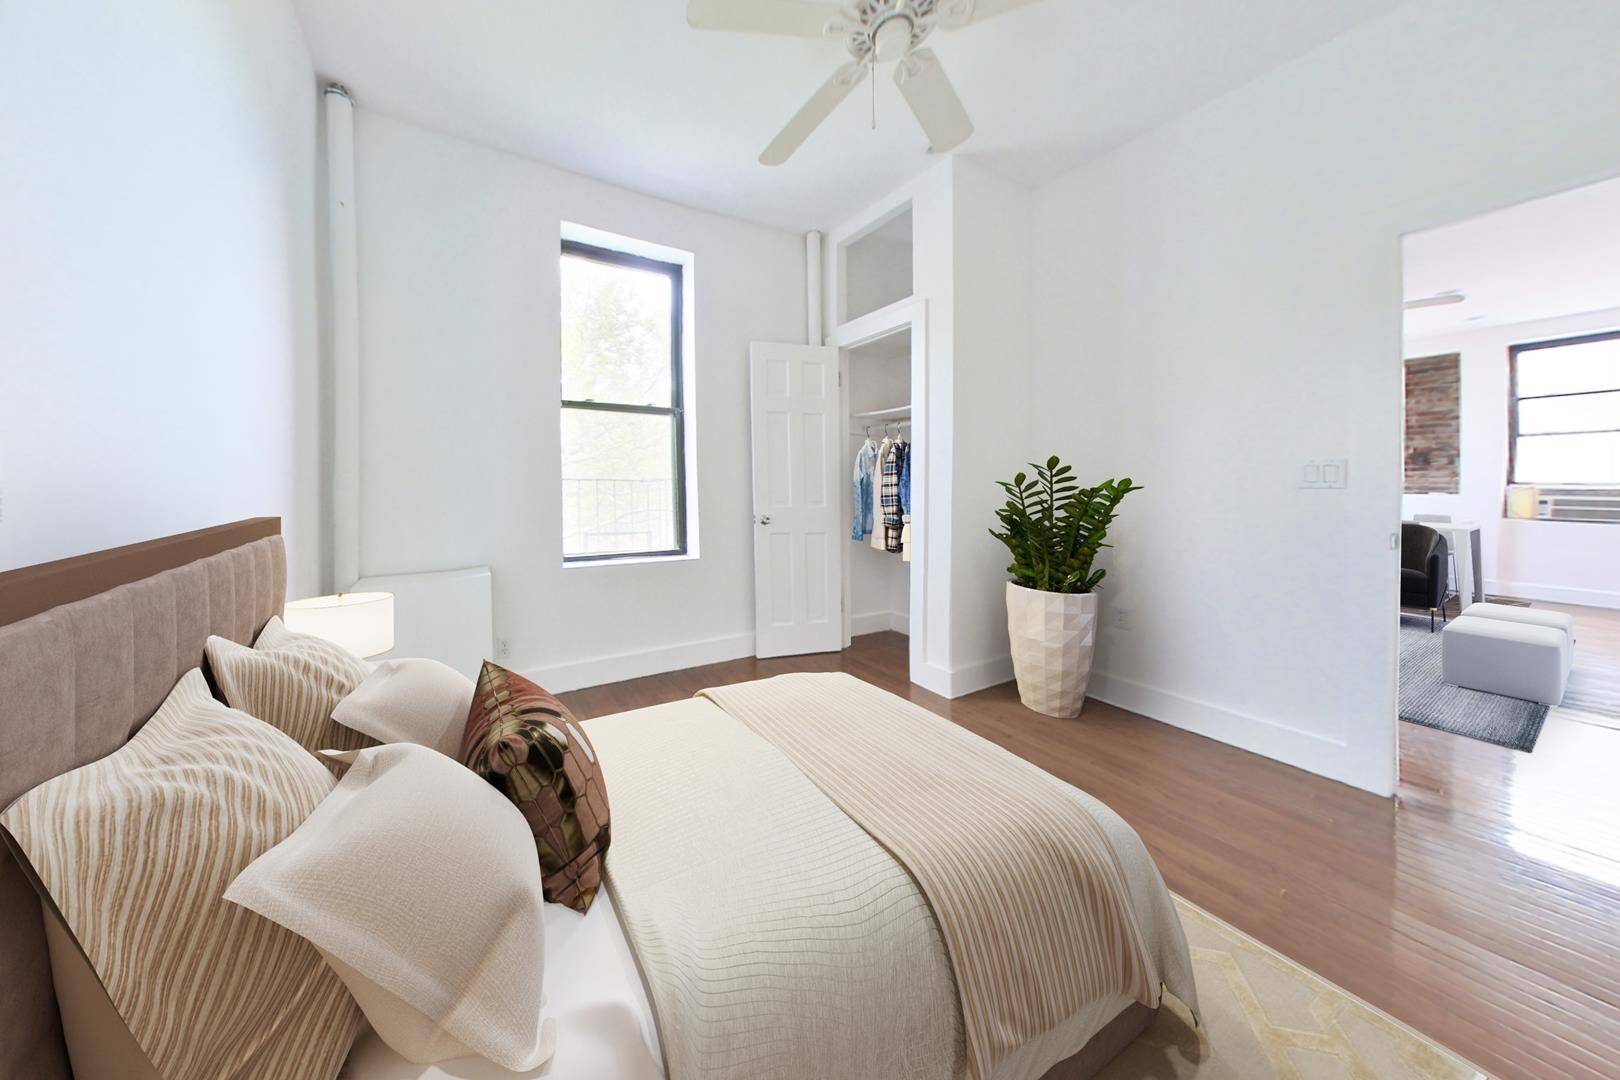 Live in the heart of historic brownstone BK, one block from Carroll Park in this fully renovated gem today !